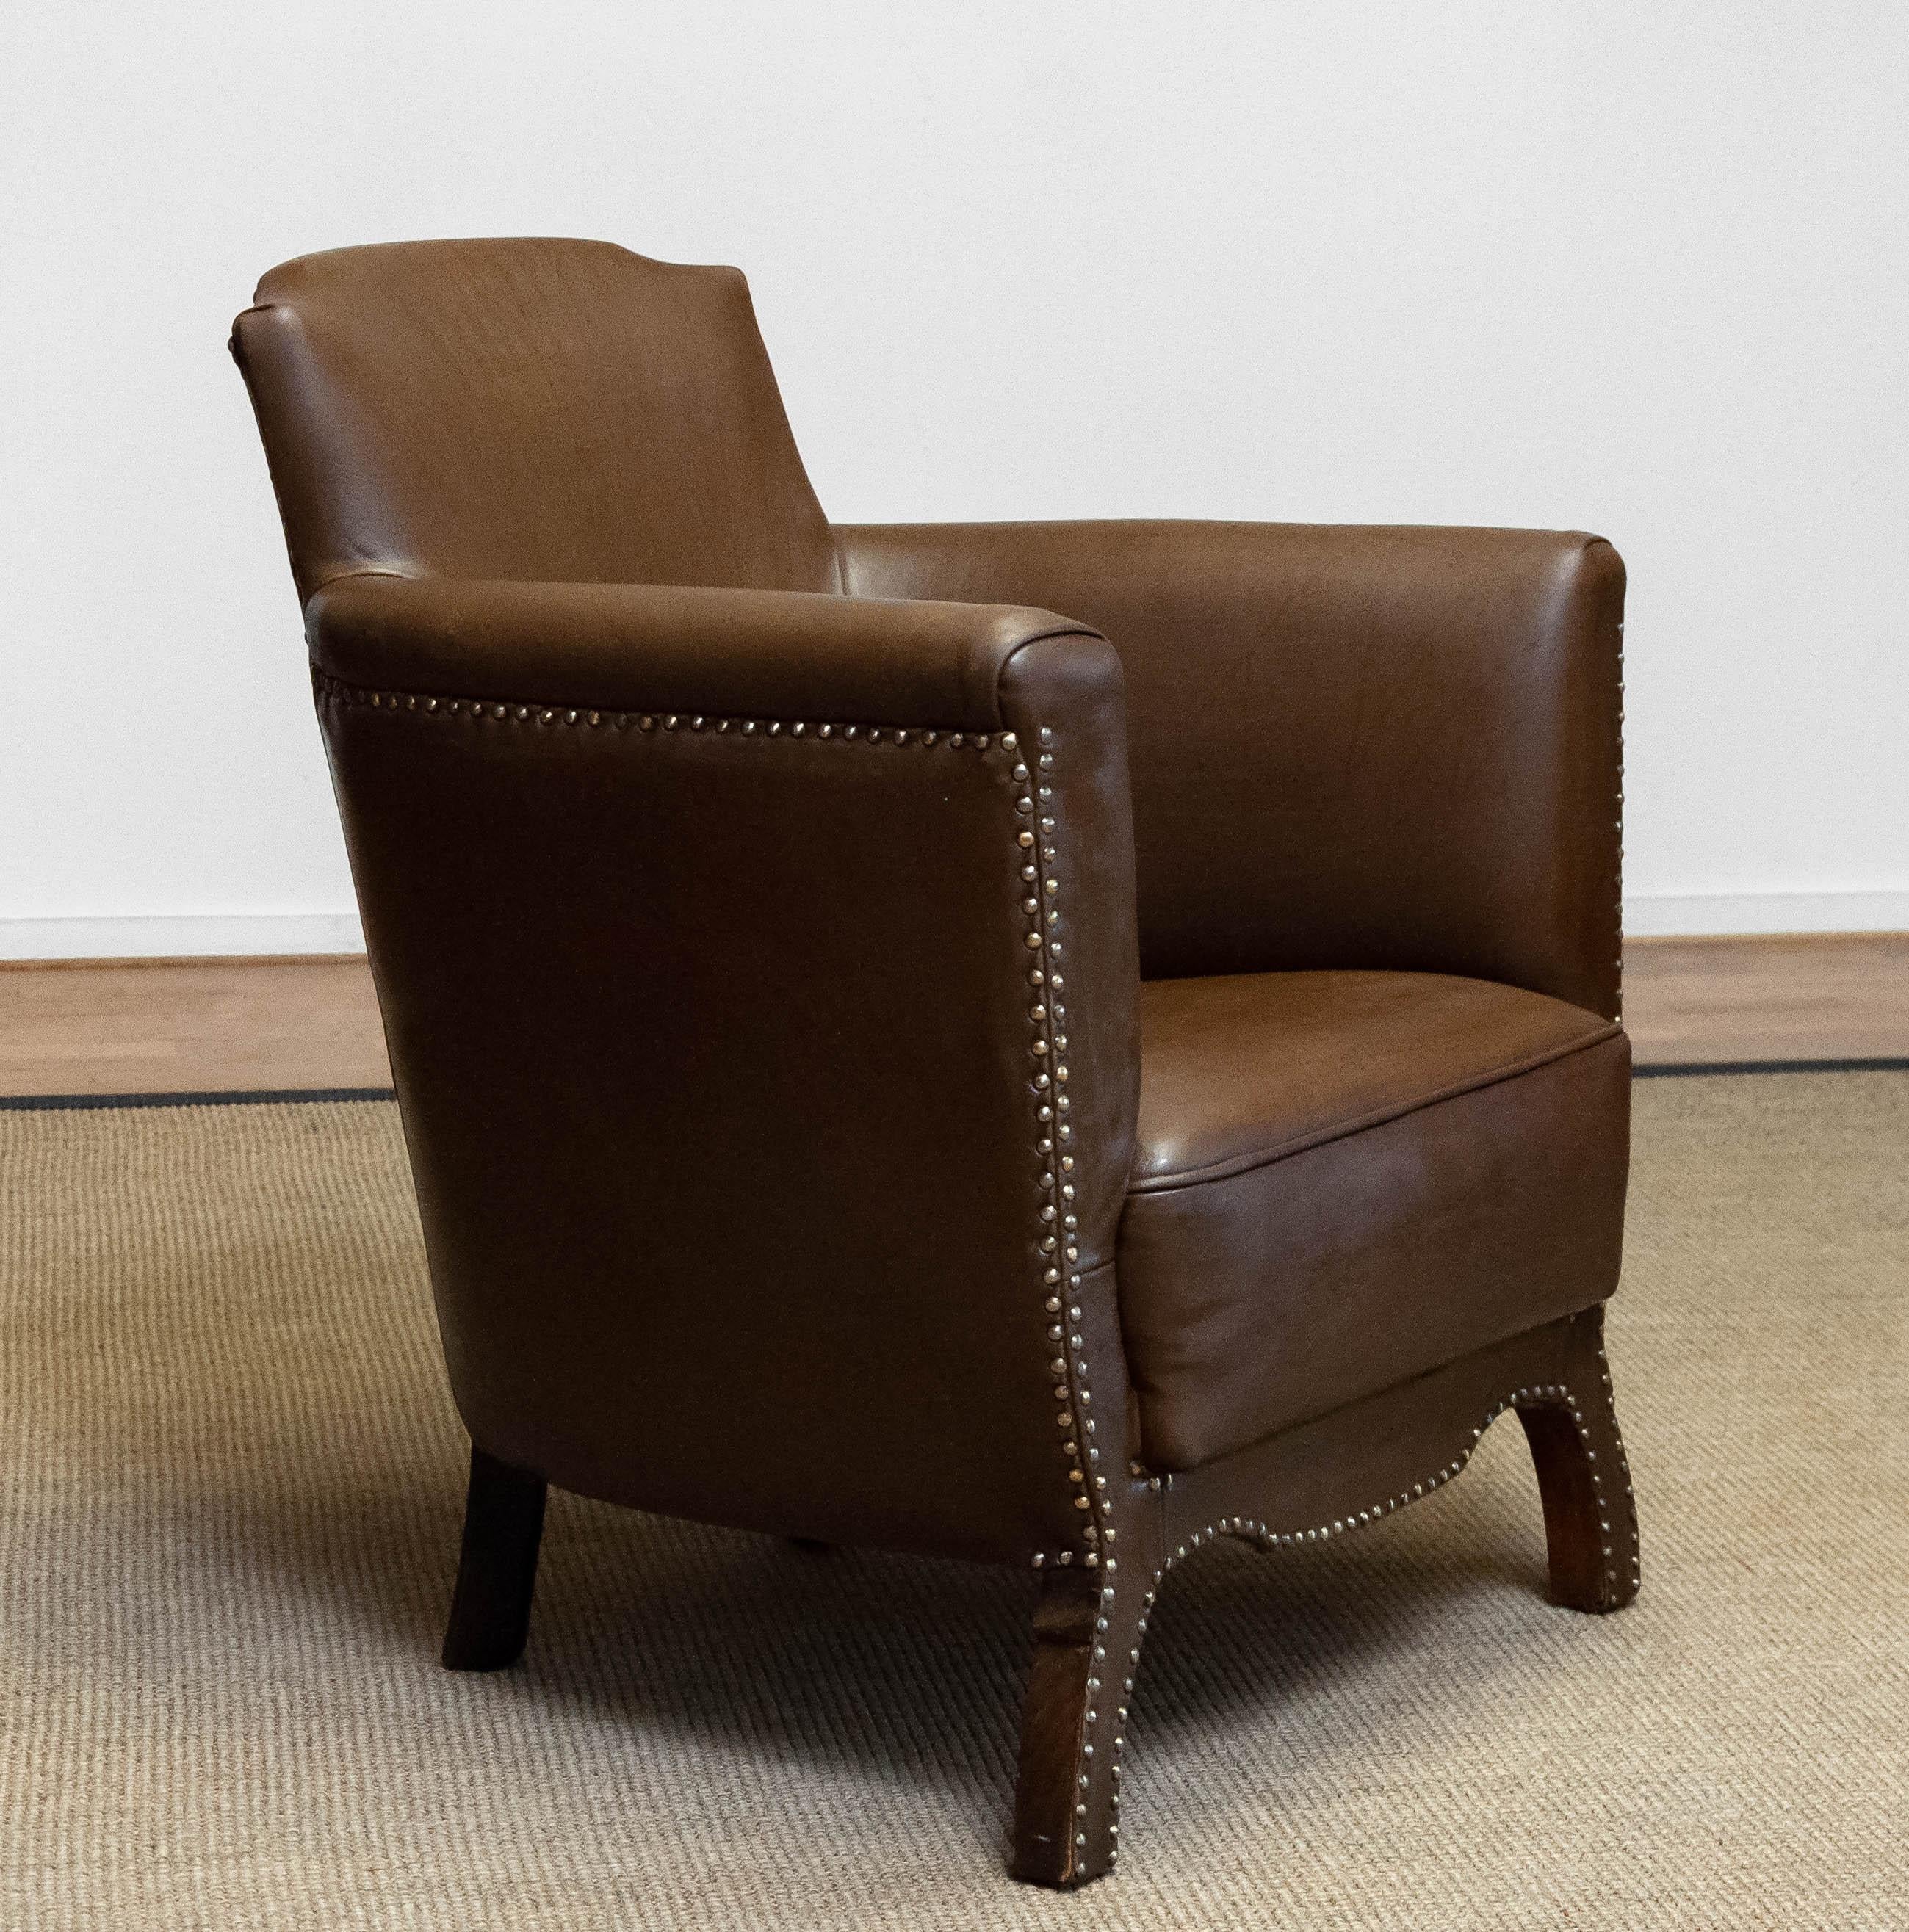 1930s Swedish Tan / Brown Nailed Leather Lounge Chair By Otto Schultz For Boet For Sale 3